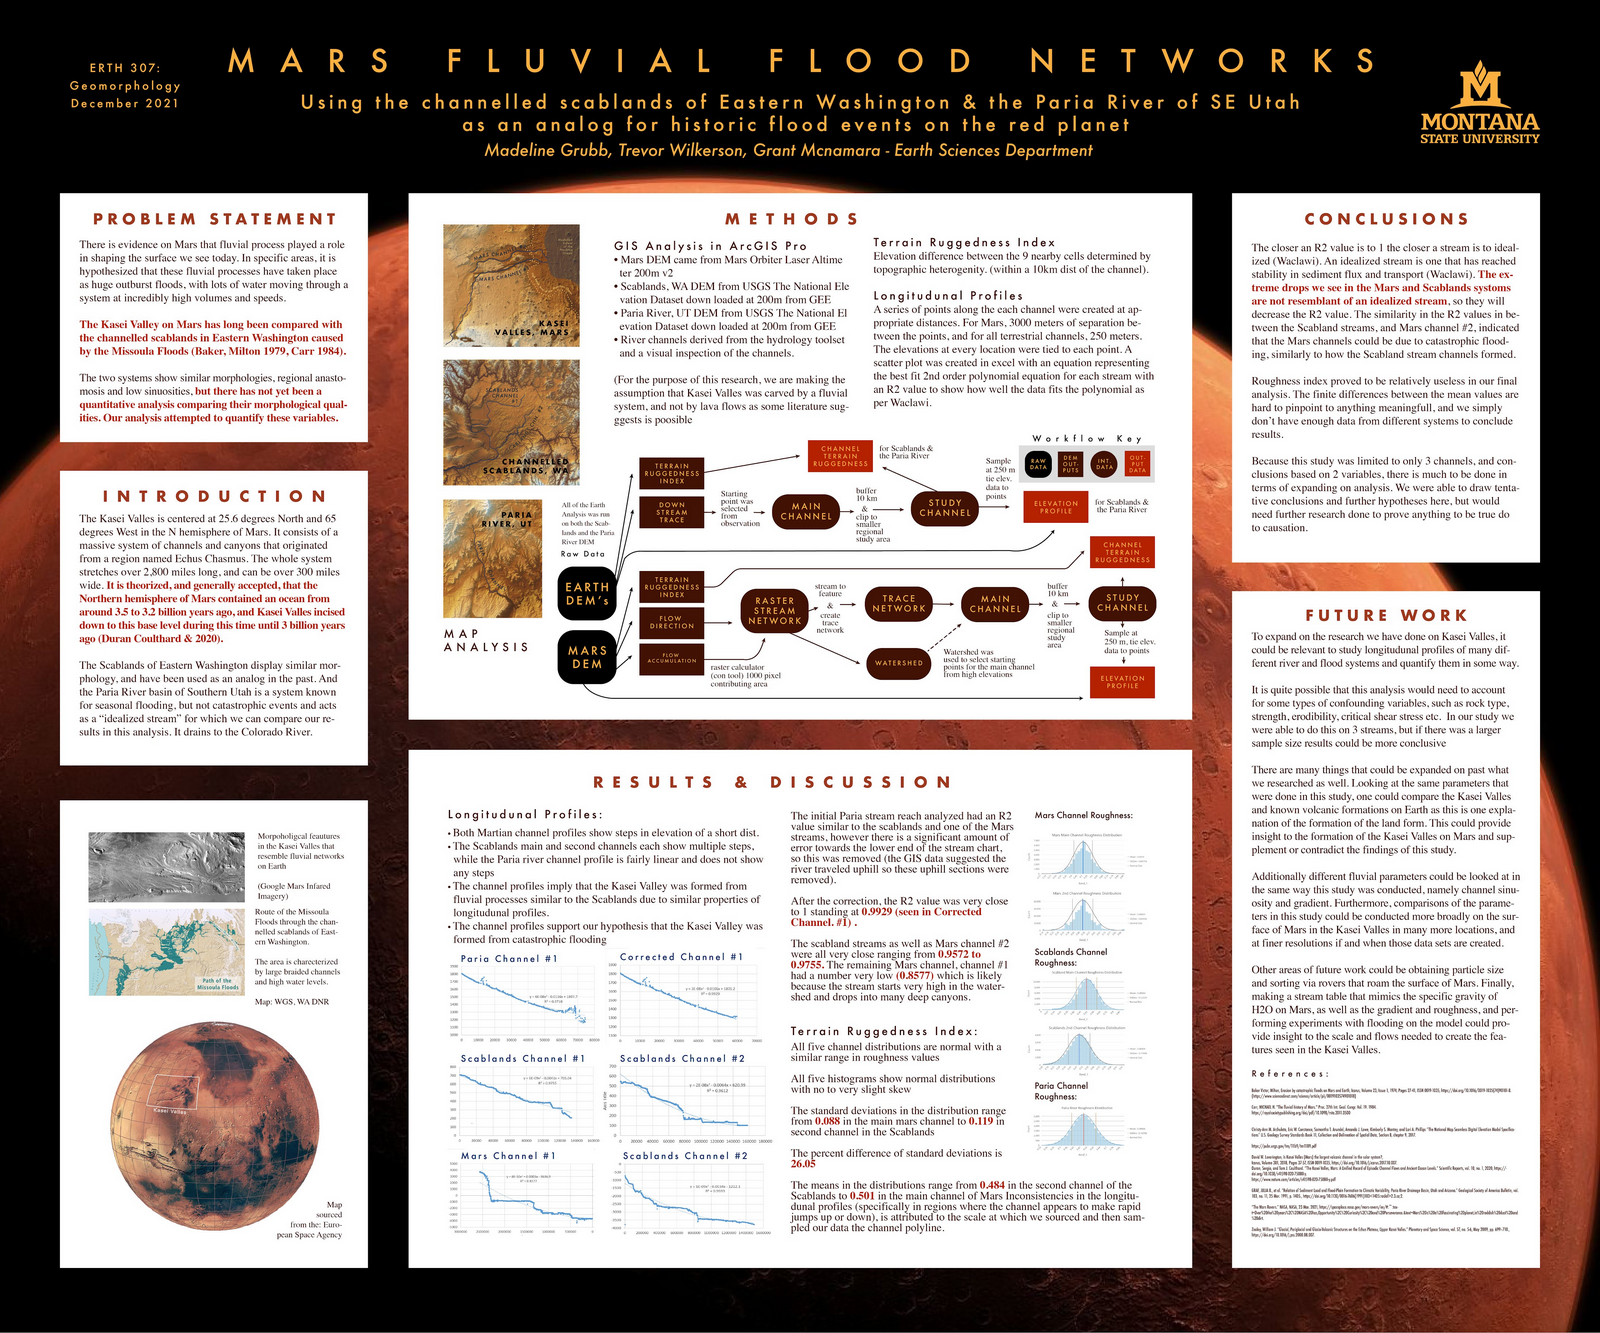 FLOODPLAINS ON THE RED PLANET